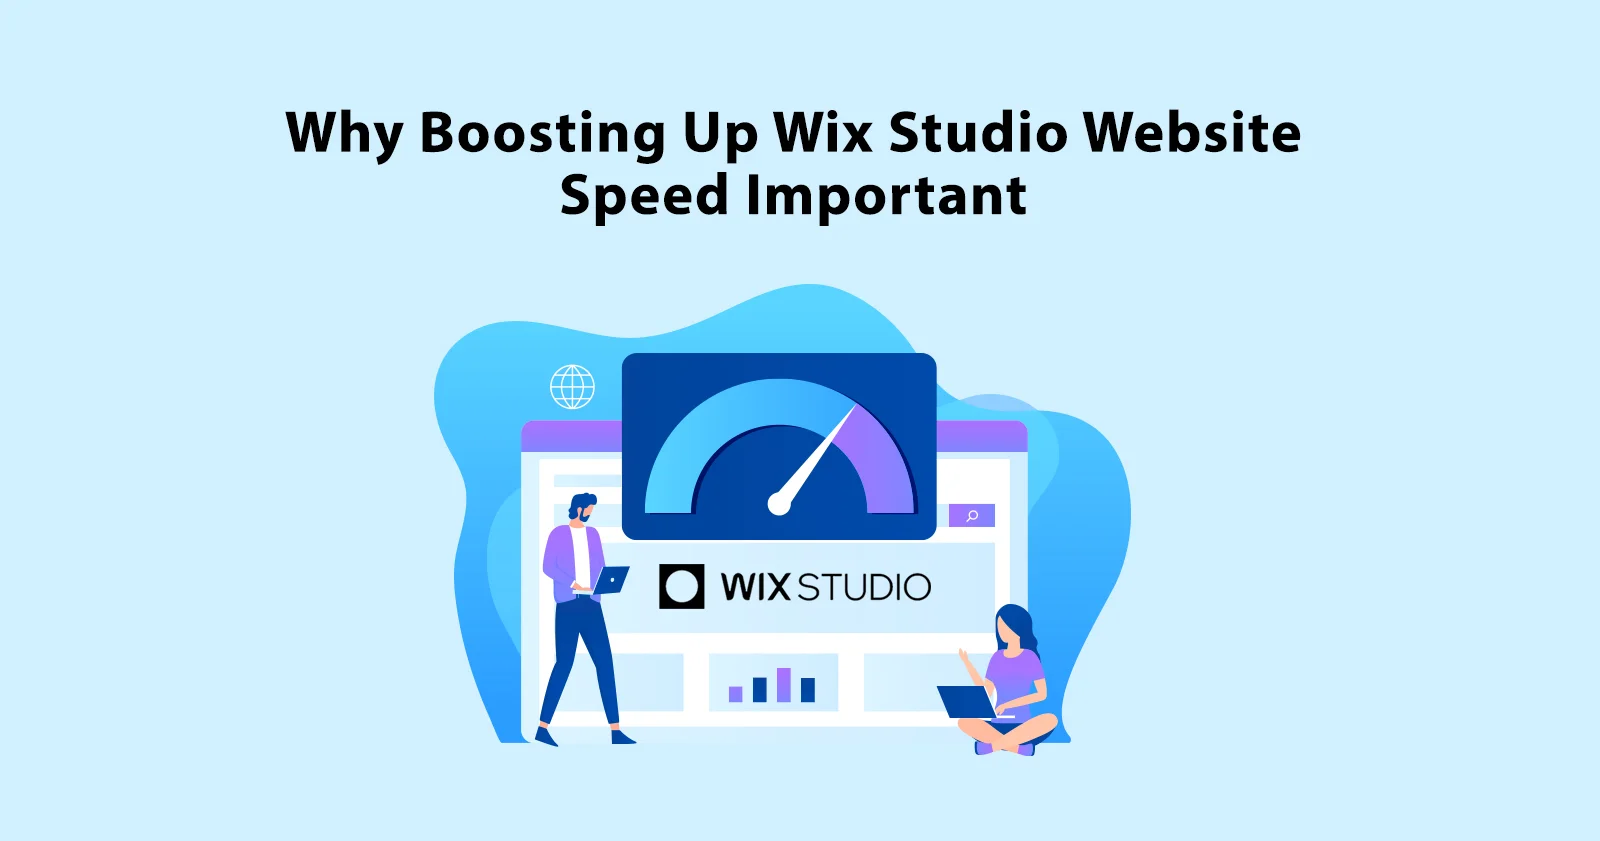 Why Boosting Up Wix Studio Website Speed Important